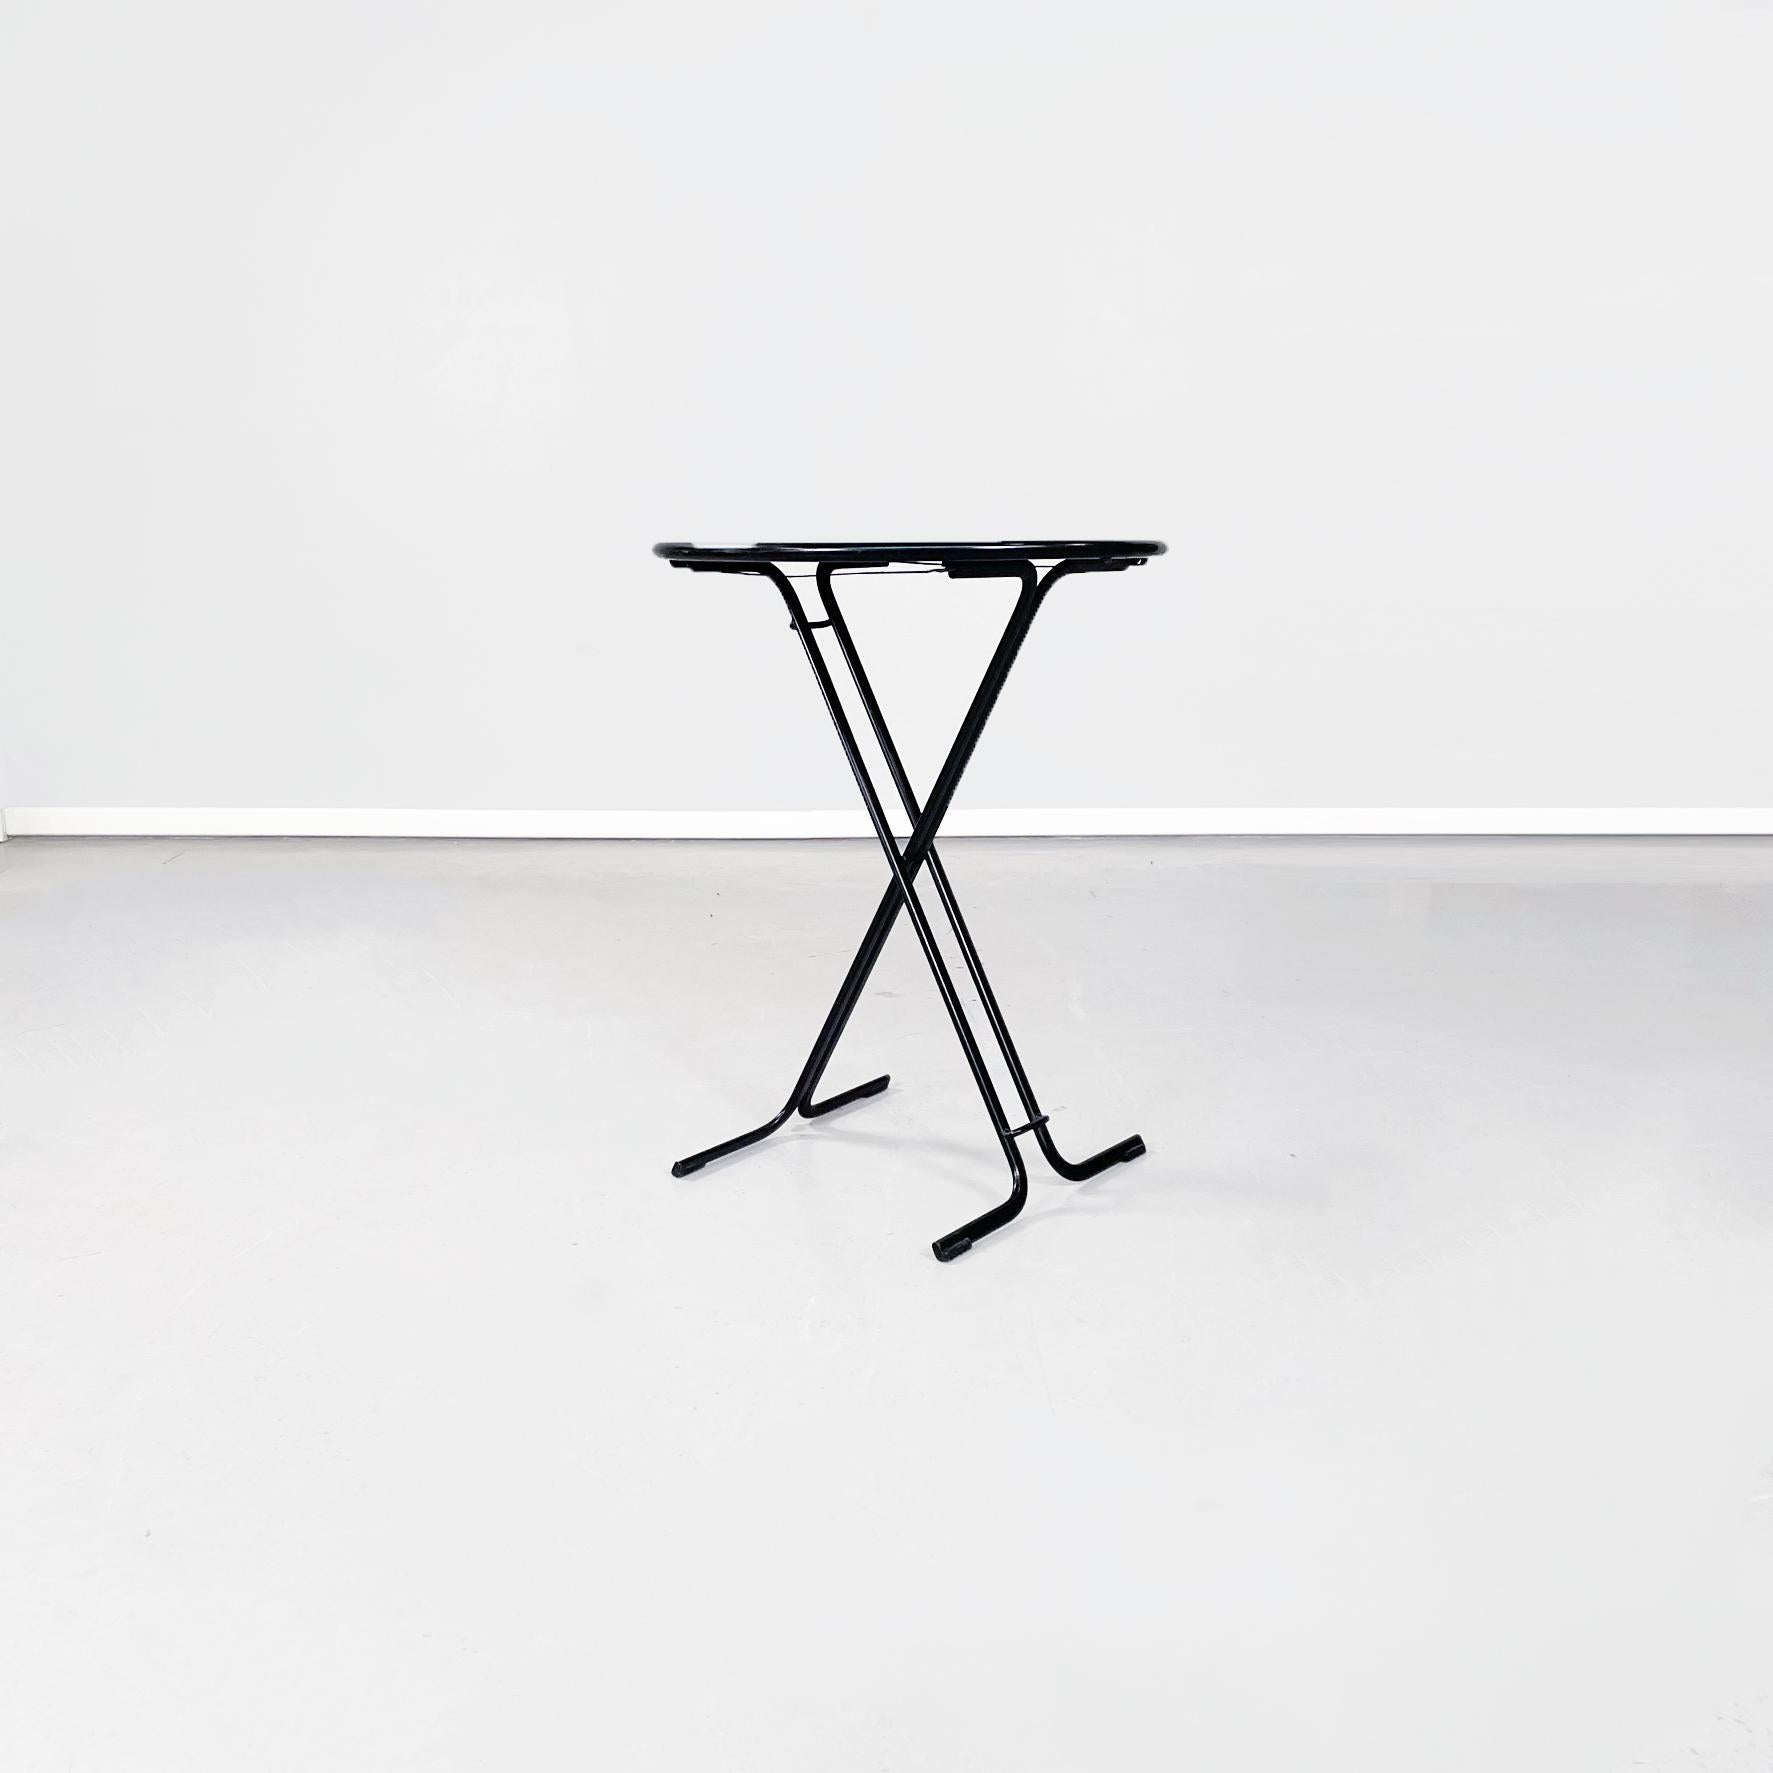 Italian Mid-Modern Coffee table in metal, 1980s.
Side table in black painted metal with circular top and rod structure.
1980s.
Good conditions

Measurements: 55Dx70H cm.
 